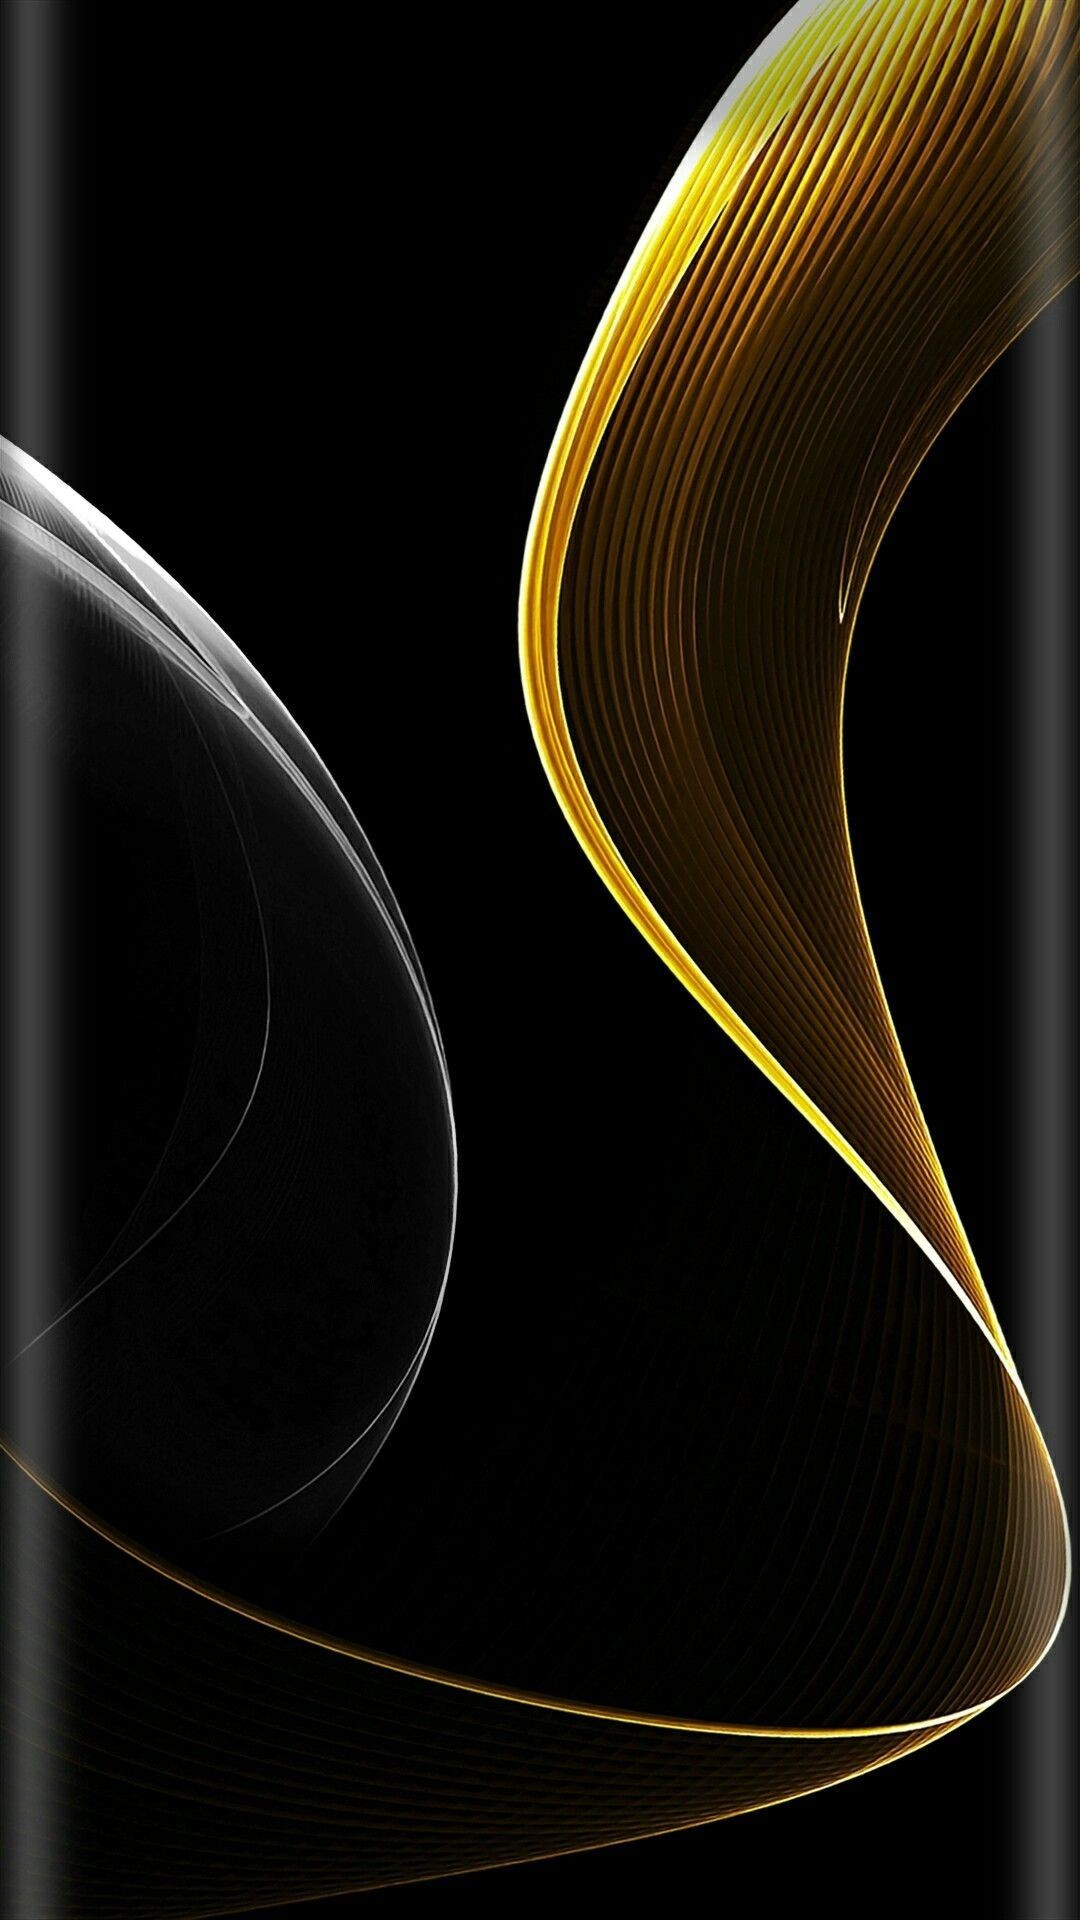 Iphone Hd Black And Gold Wallpaper / These 835 dark iphone wallpapers